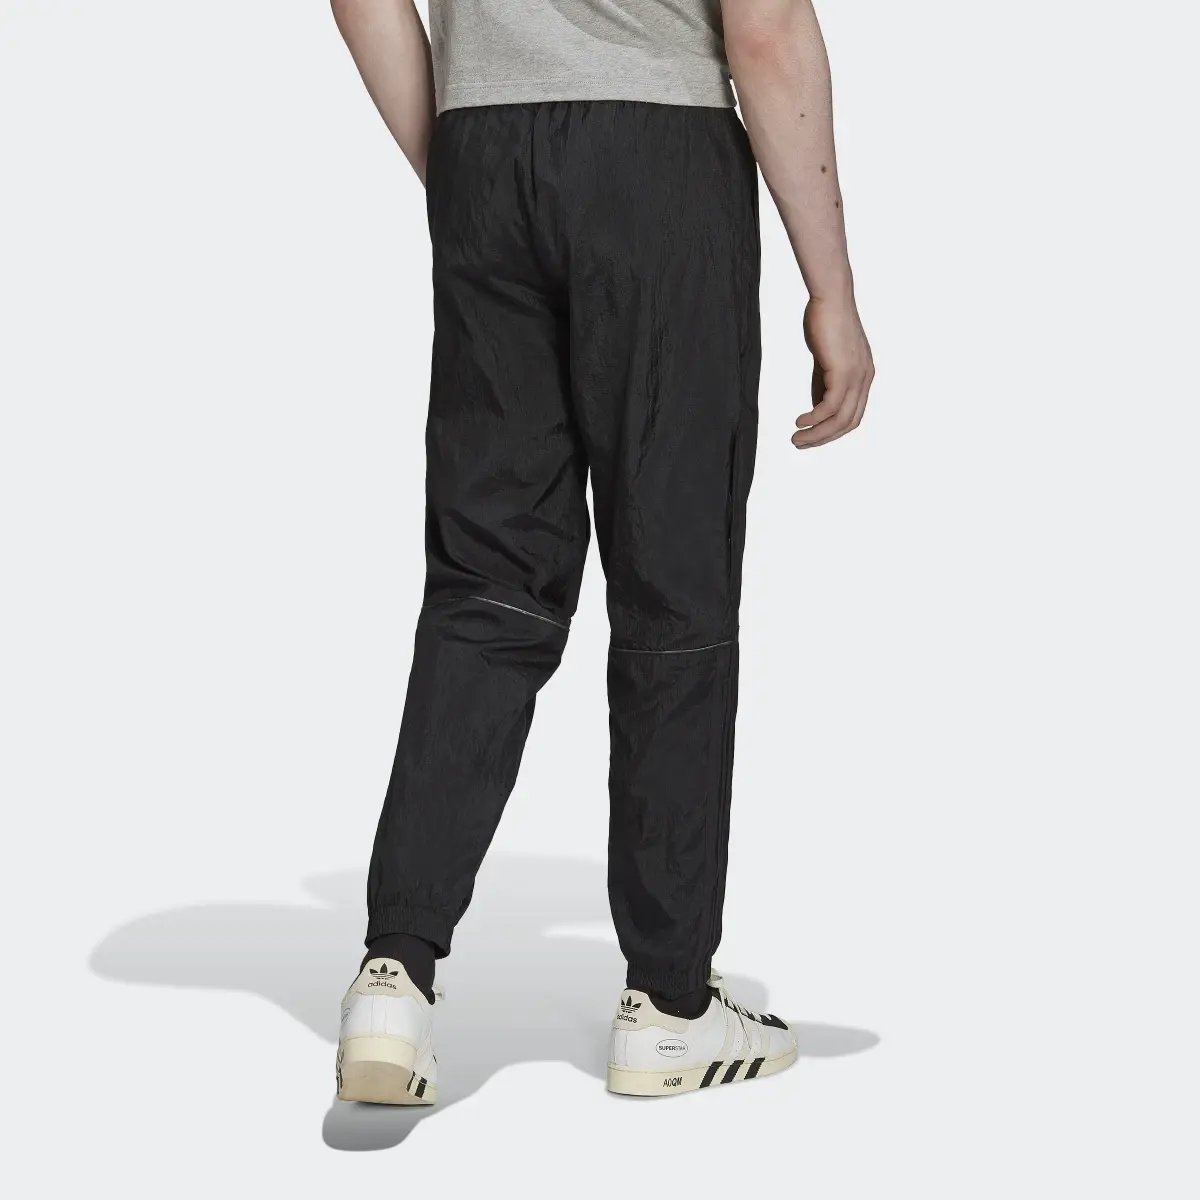 Adidas Reveal Material Mix Tracksuit Bottoms. 2